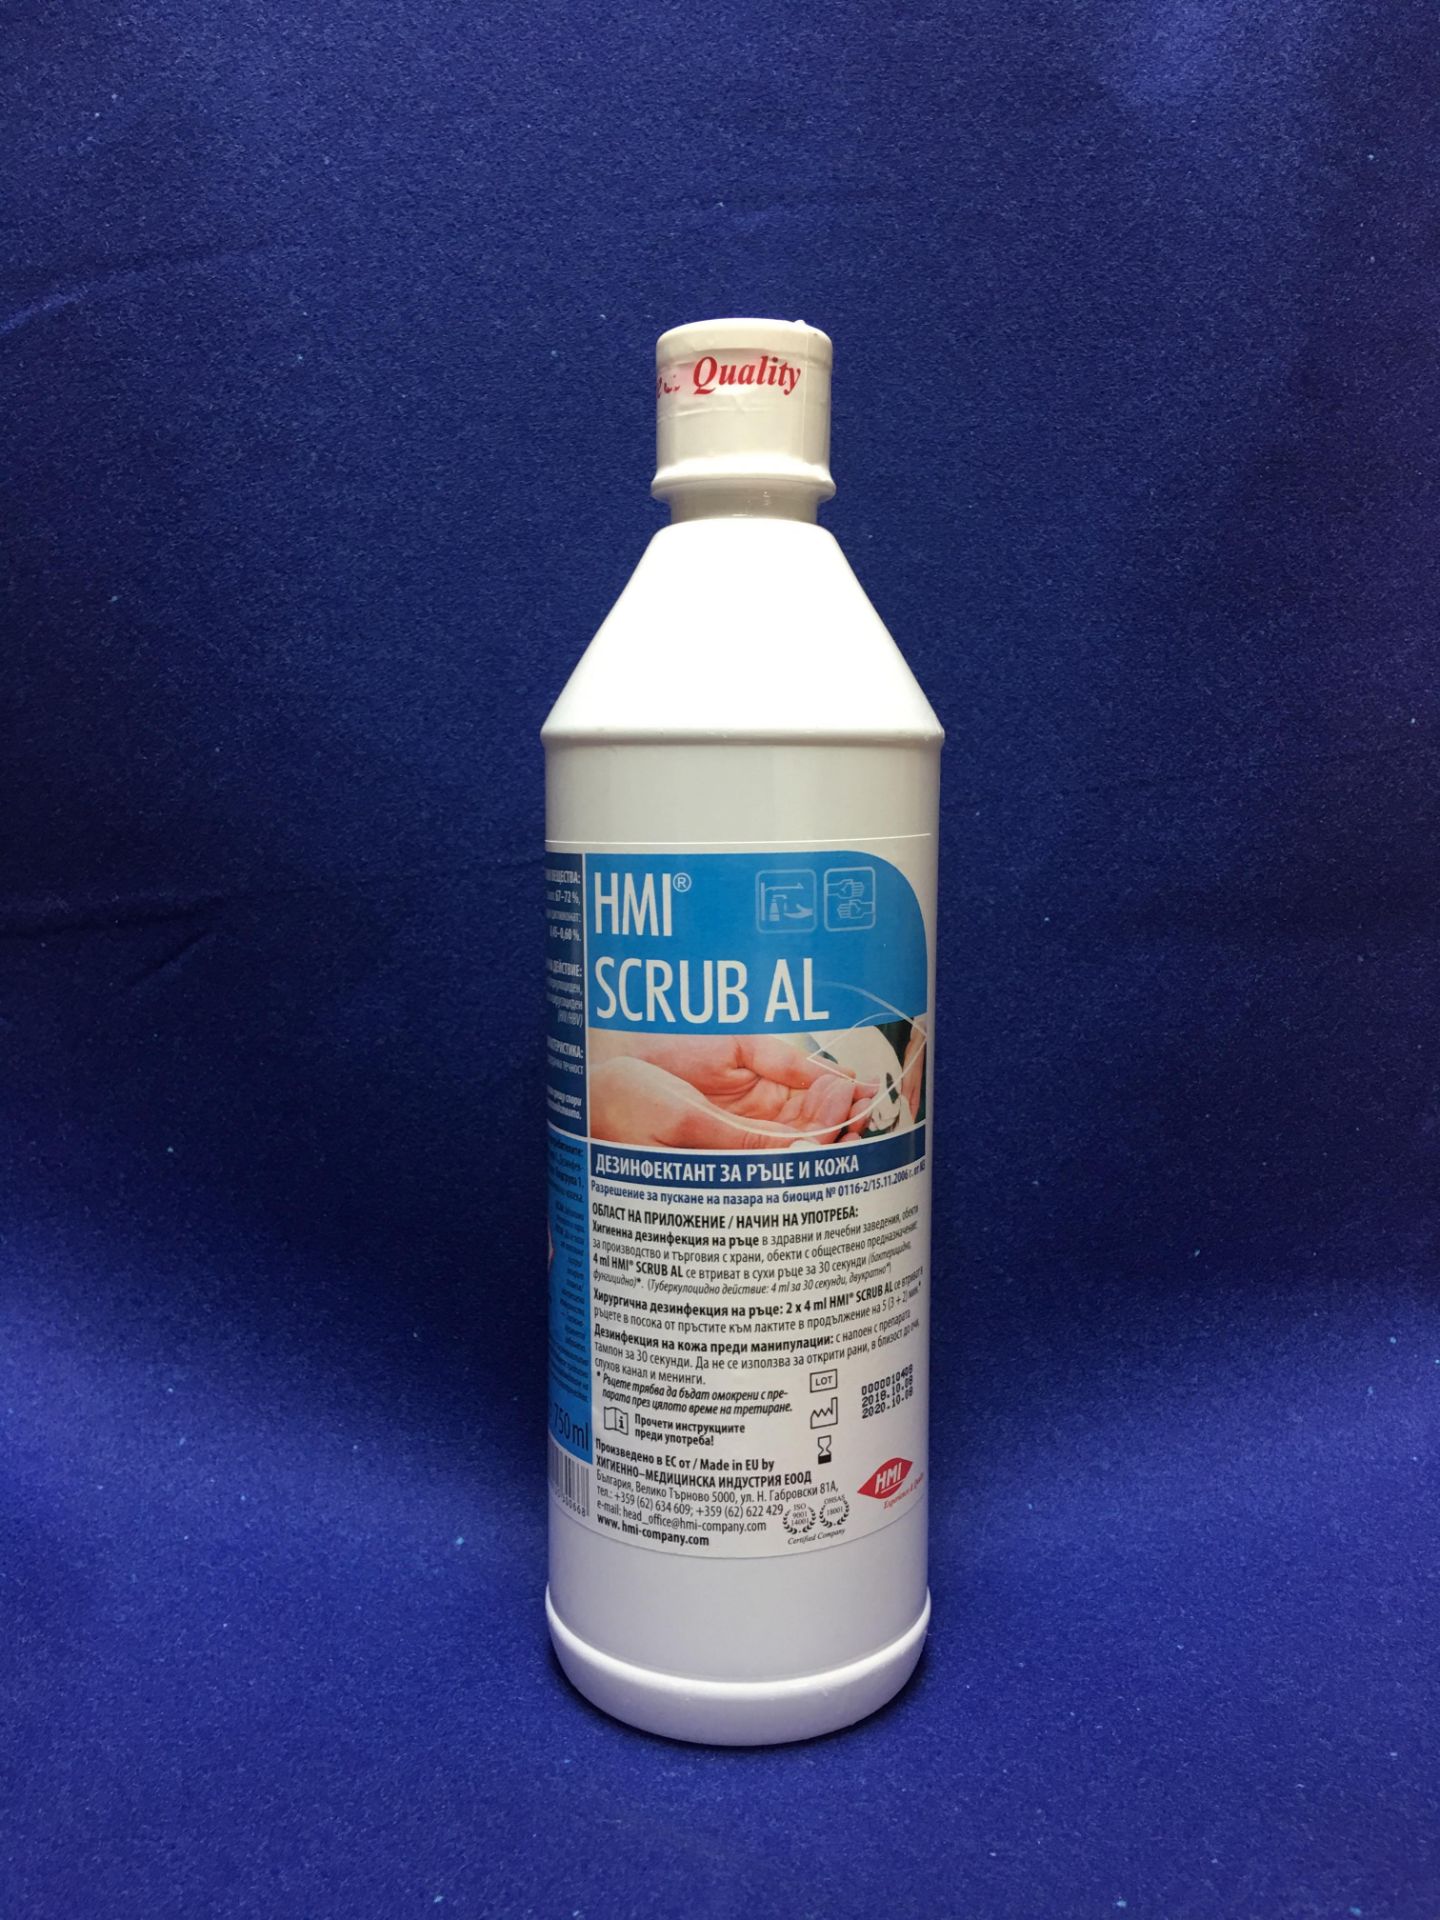 50 x 750ml Scrub All Disinfectant For Hand, Skin Cleaning - Image 8 of 12